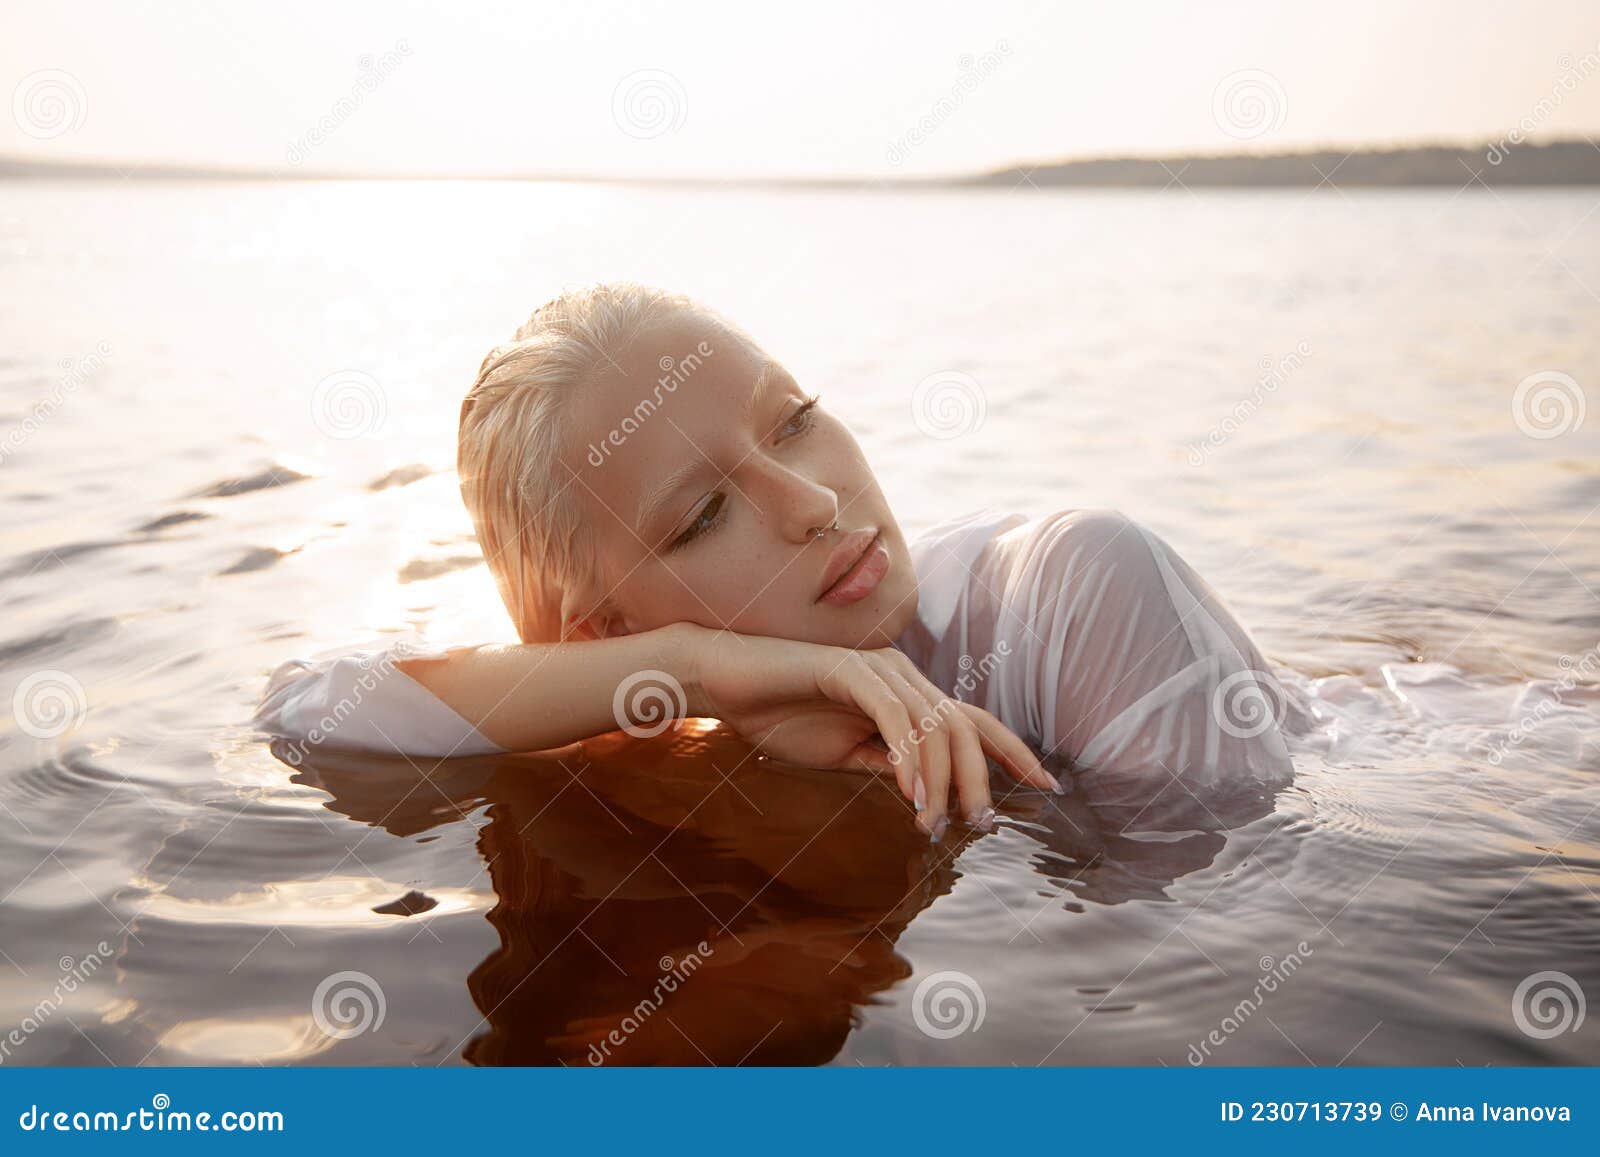 1600px x 1157px - Nude Naked Woman in Water at Sunset. Beautiful Blonde Woman with Short Wet  Hair and Big Breasts, Art Portrait in Sea Stock Image - Image of blonde,  hair: 230713739